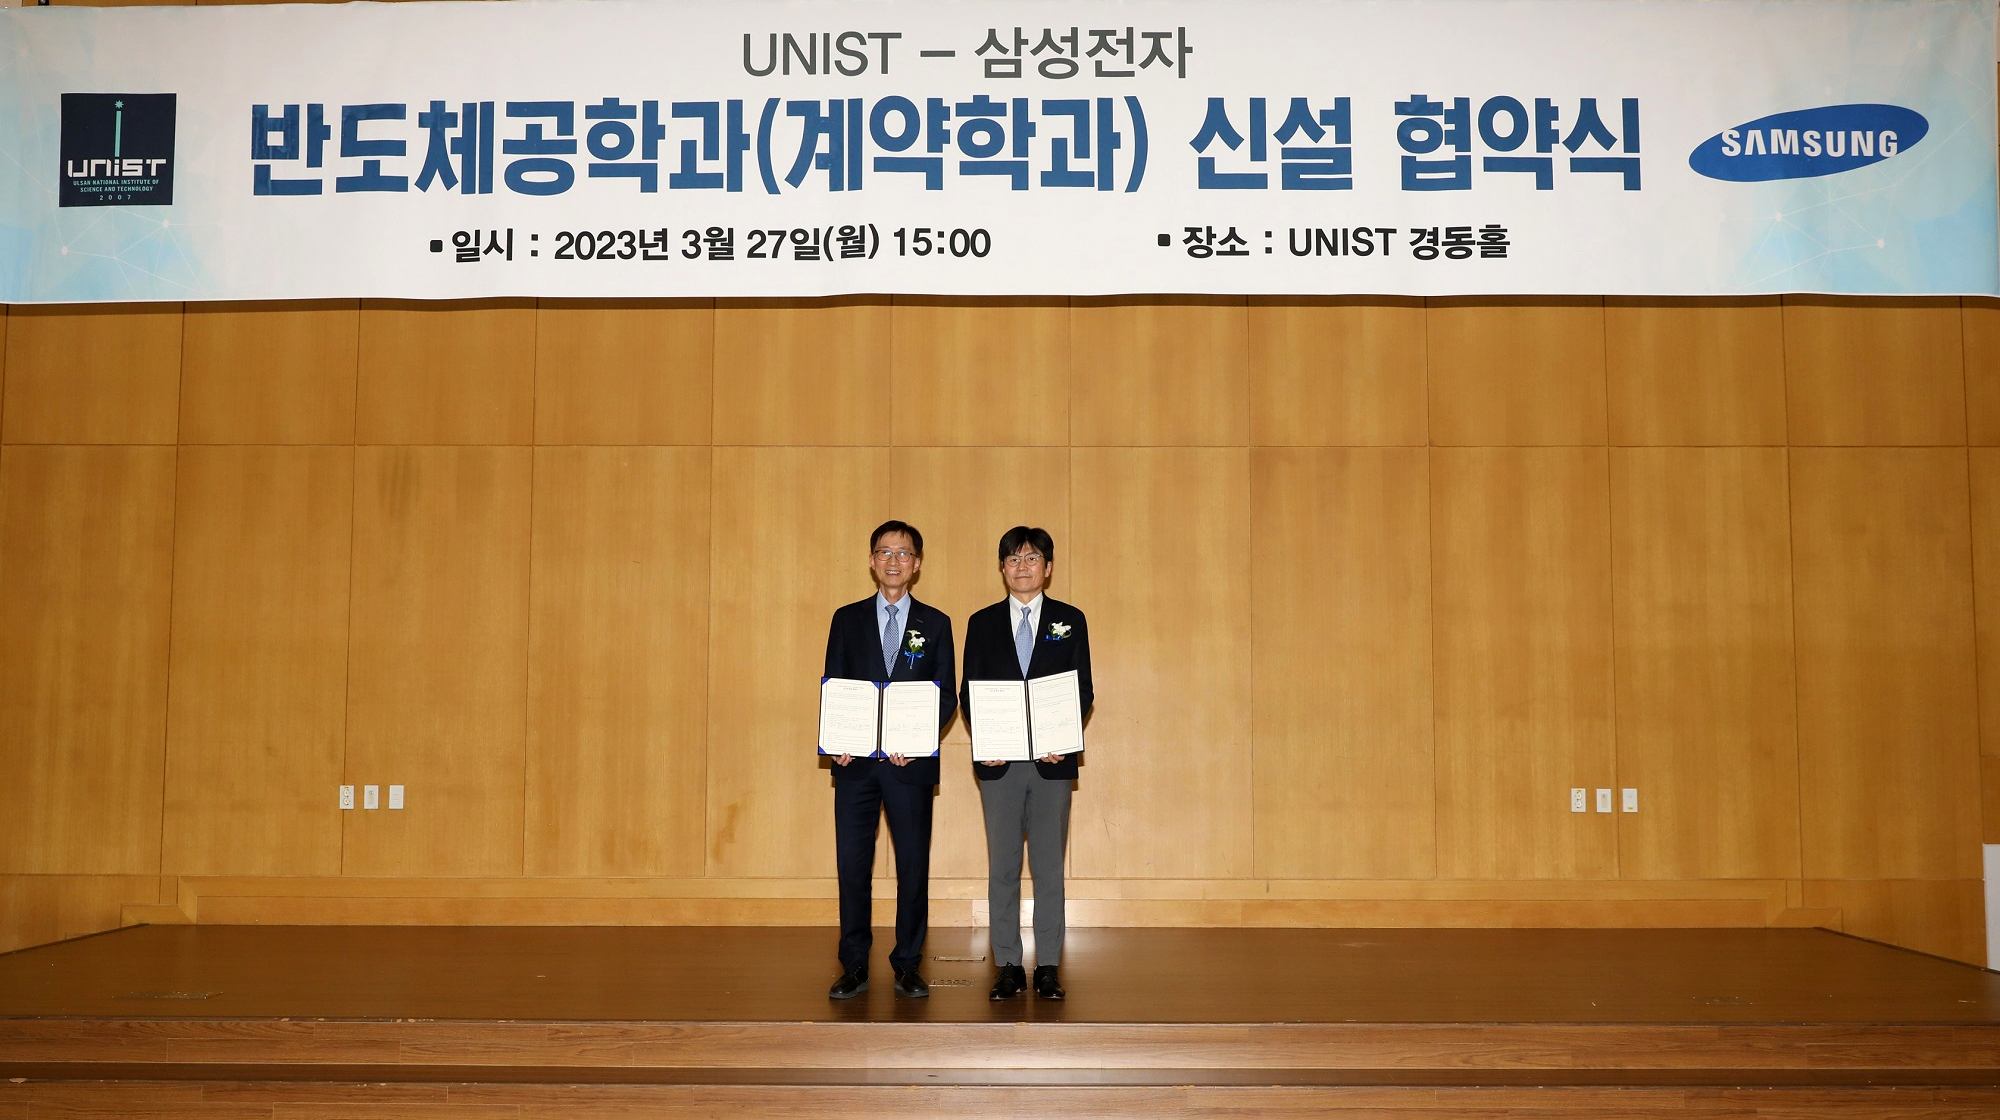 The signing ceremony of the Memorandum of Understanding (MoU) between UNIST and Samsung Electronics Co., Ltd. took place on March 27, 2023. 